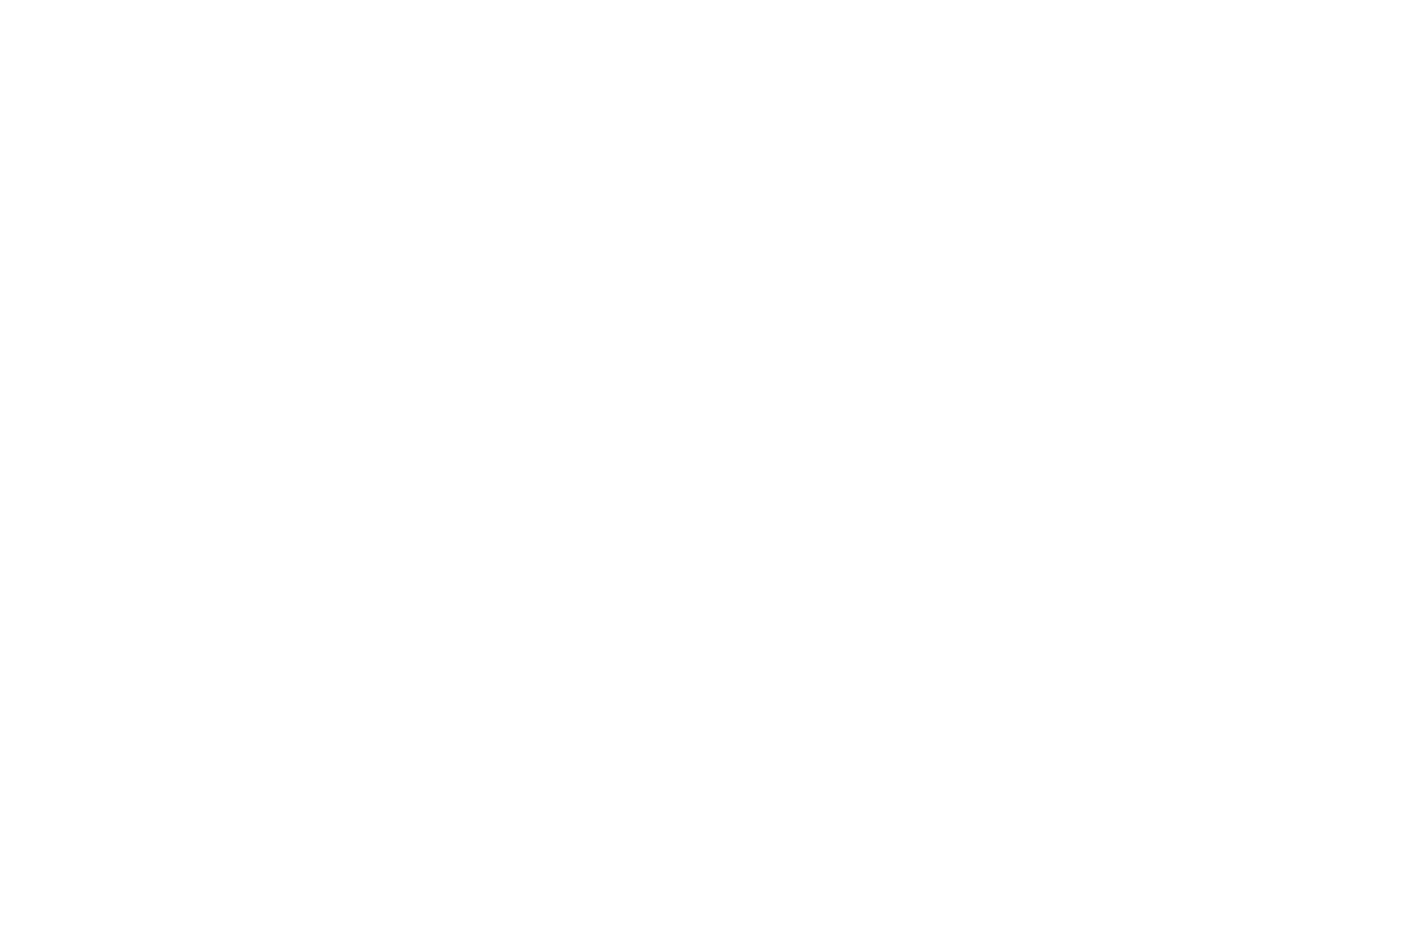 Oncology Professional Care 2023